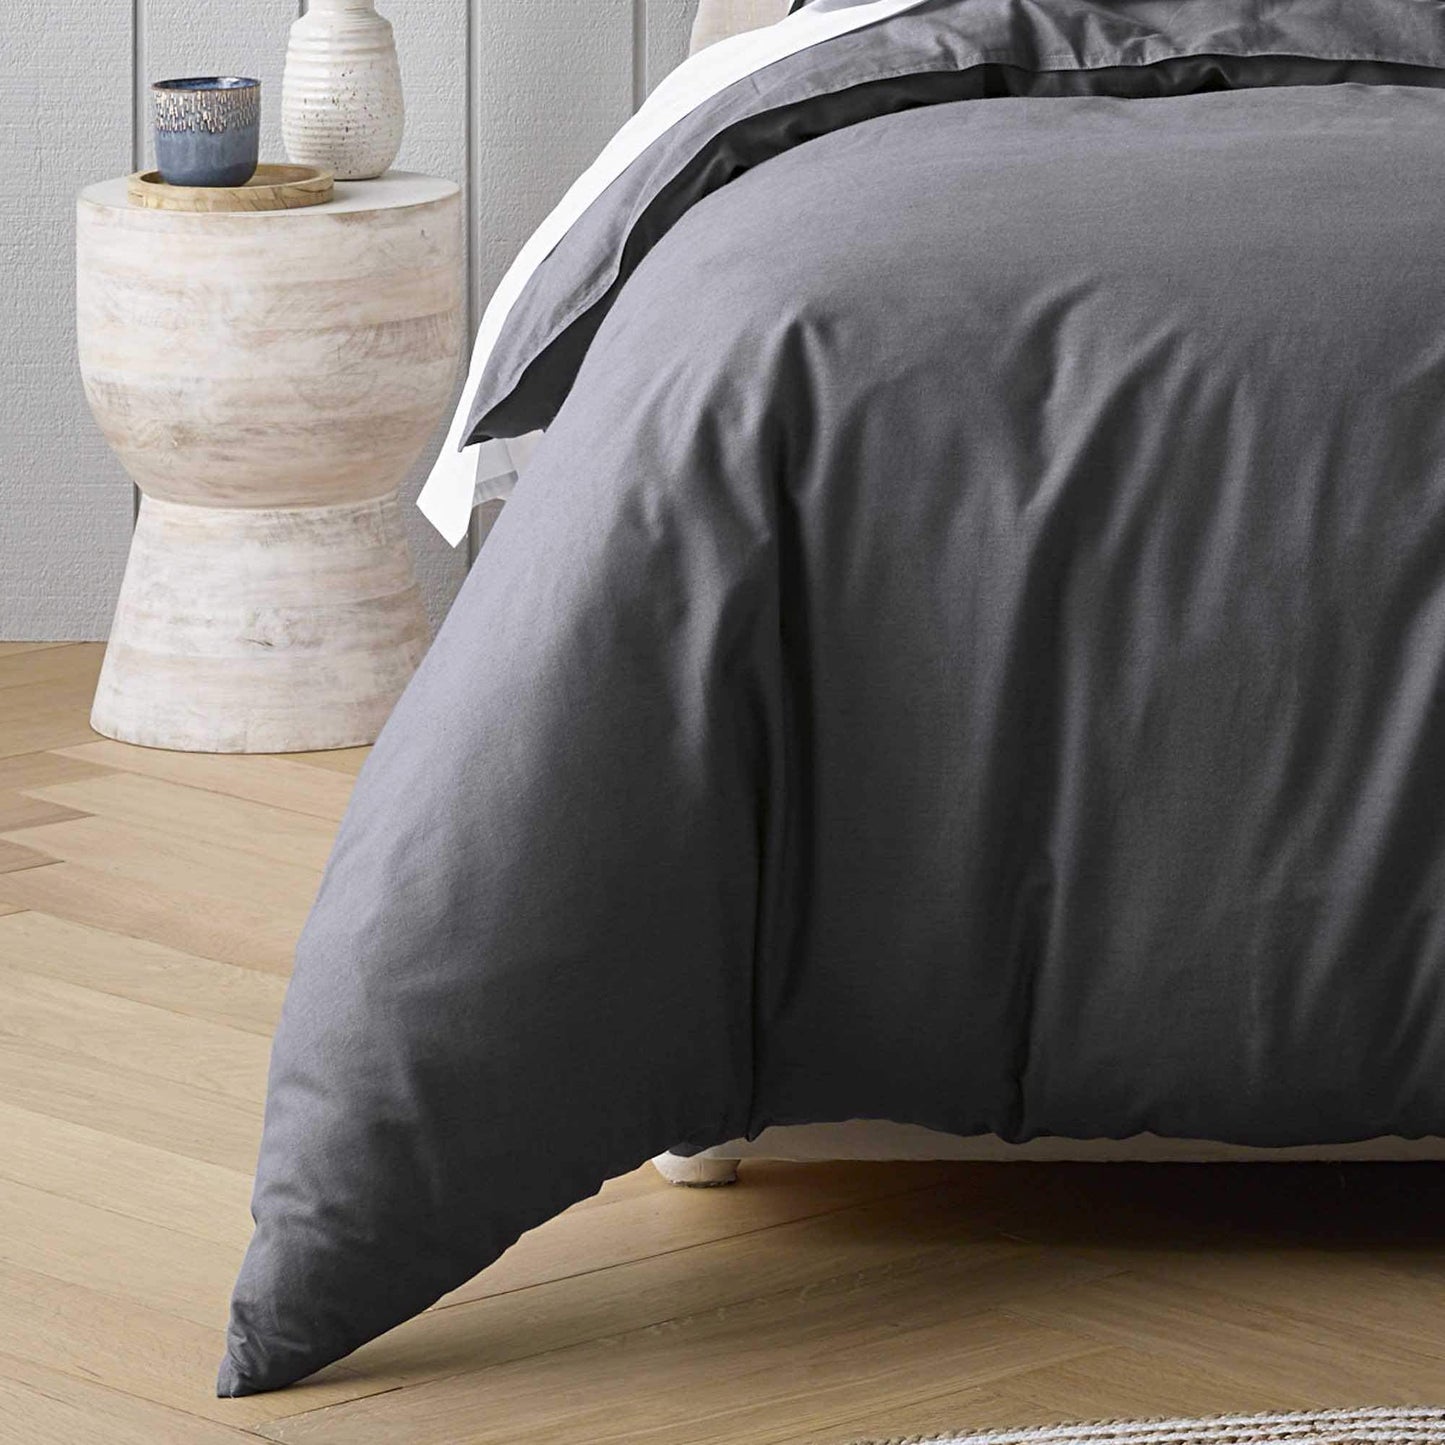 Riviera Organic Washed Cotton Quilt Cover Set Range Charcoal by Bianca